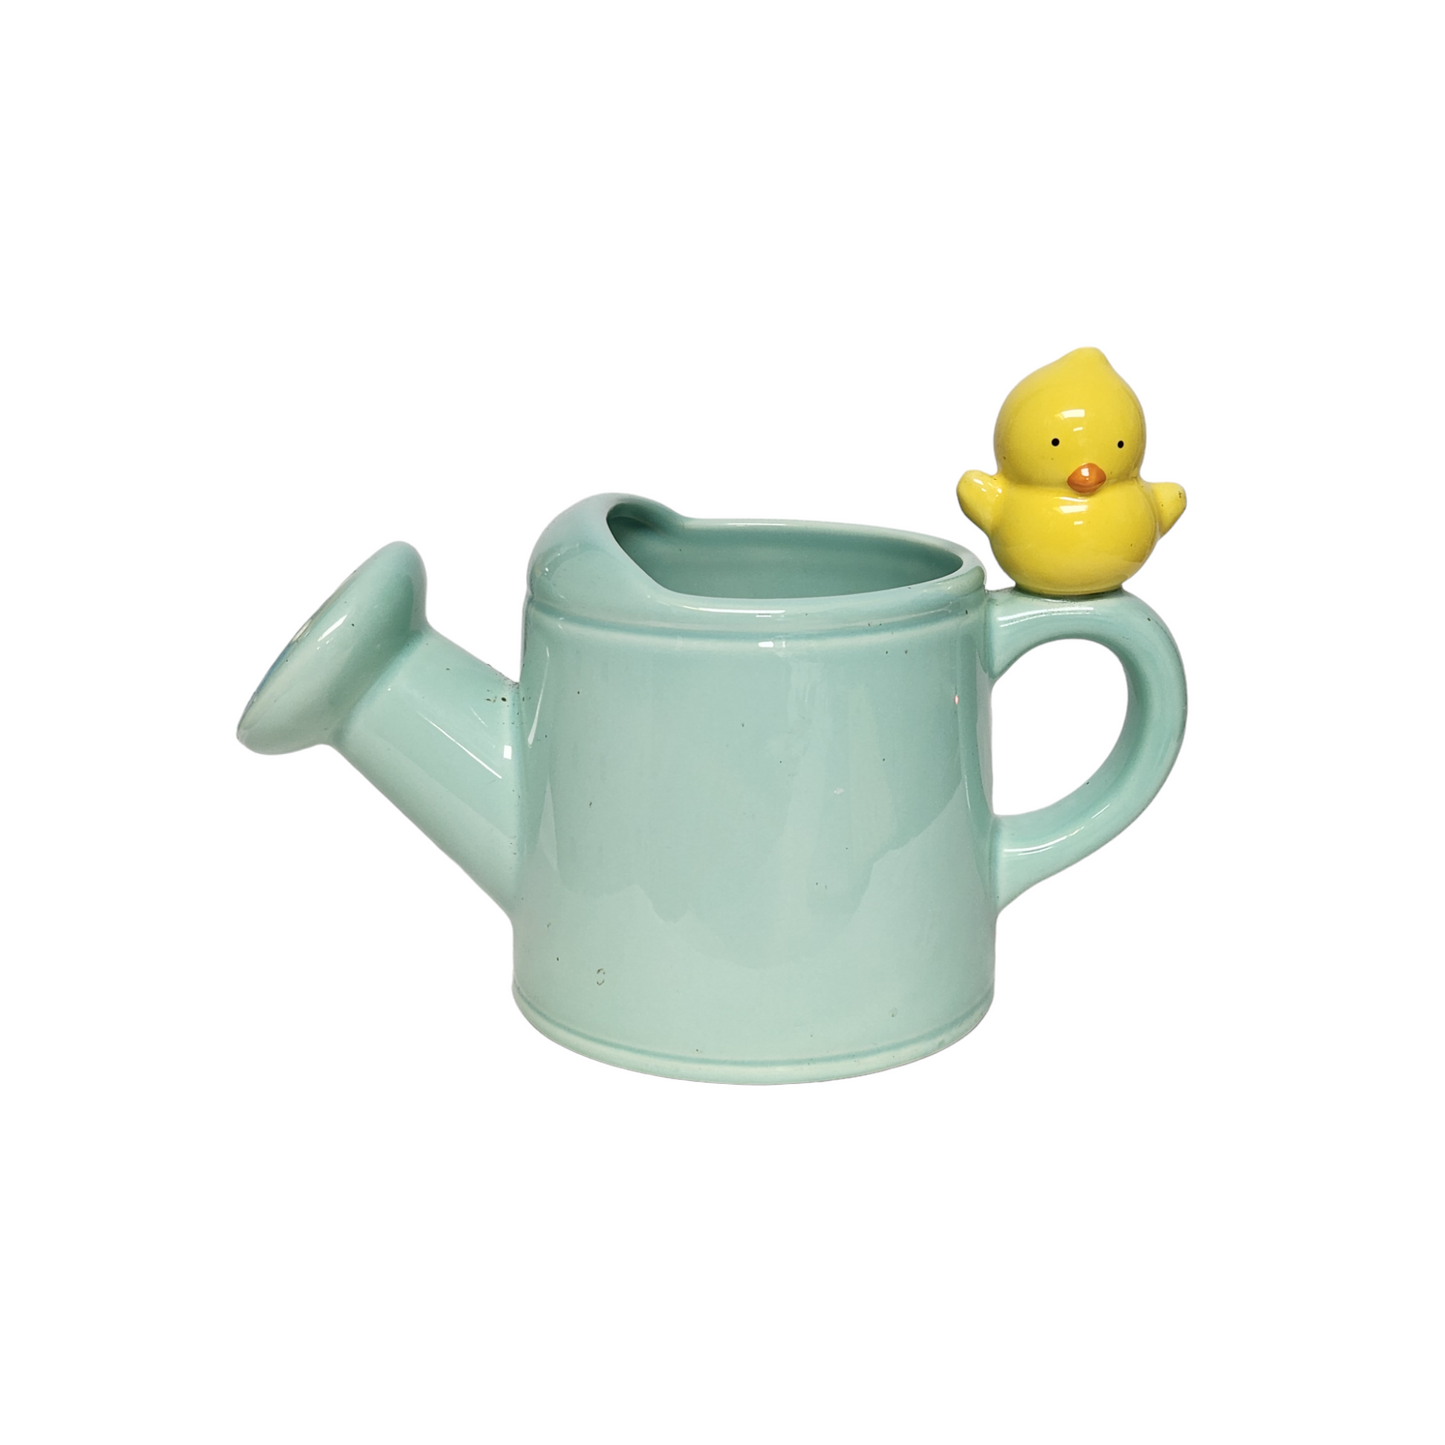 Teleflora Gifts Ceramic Chick on Watering Can Planter Vase